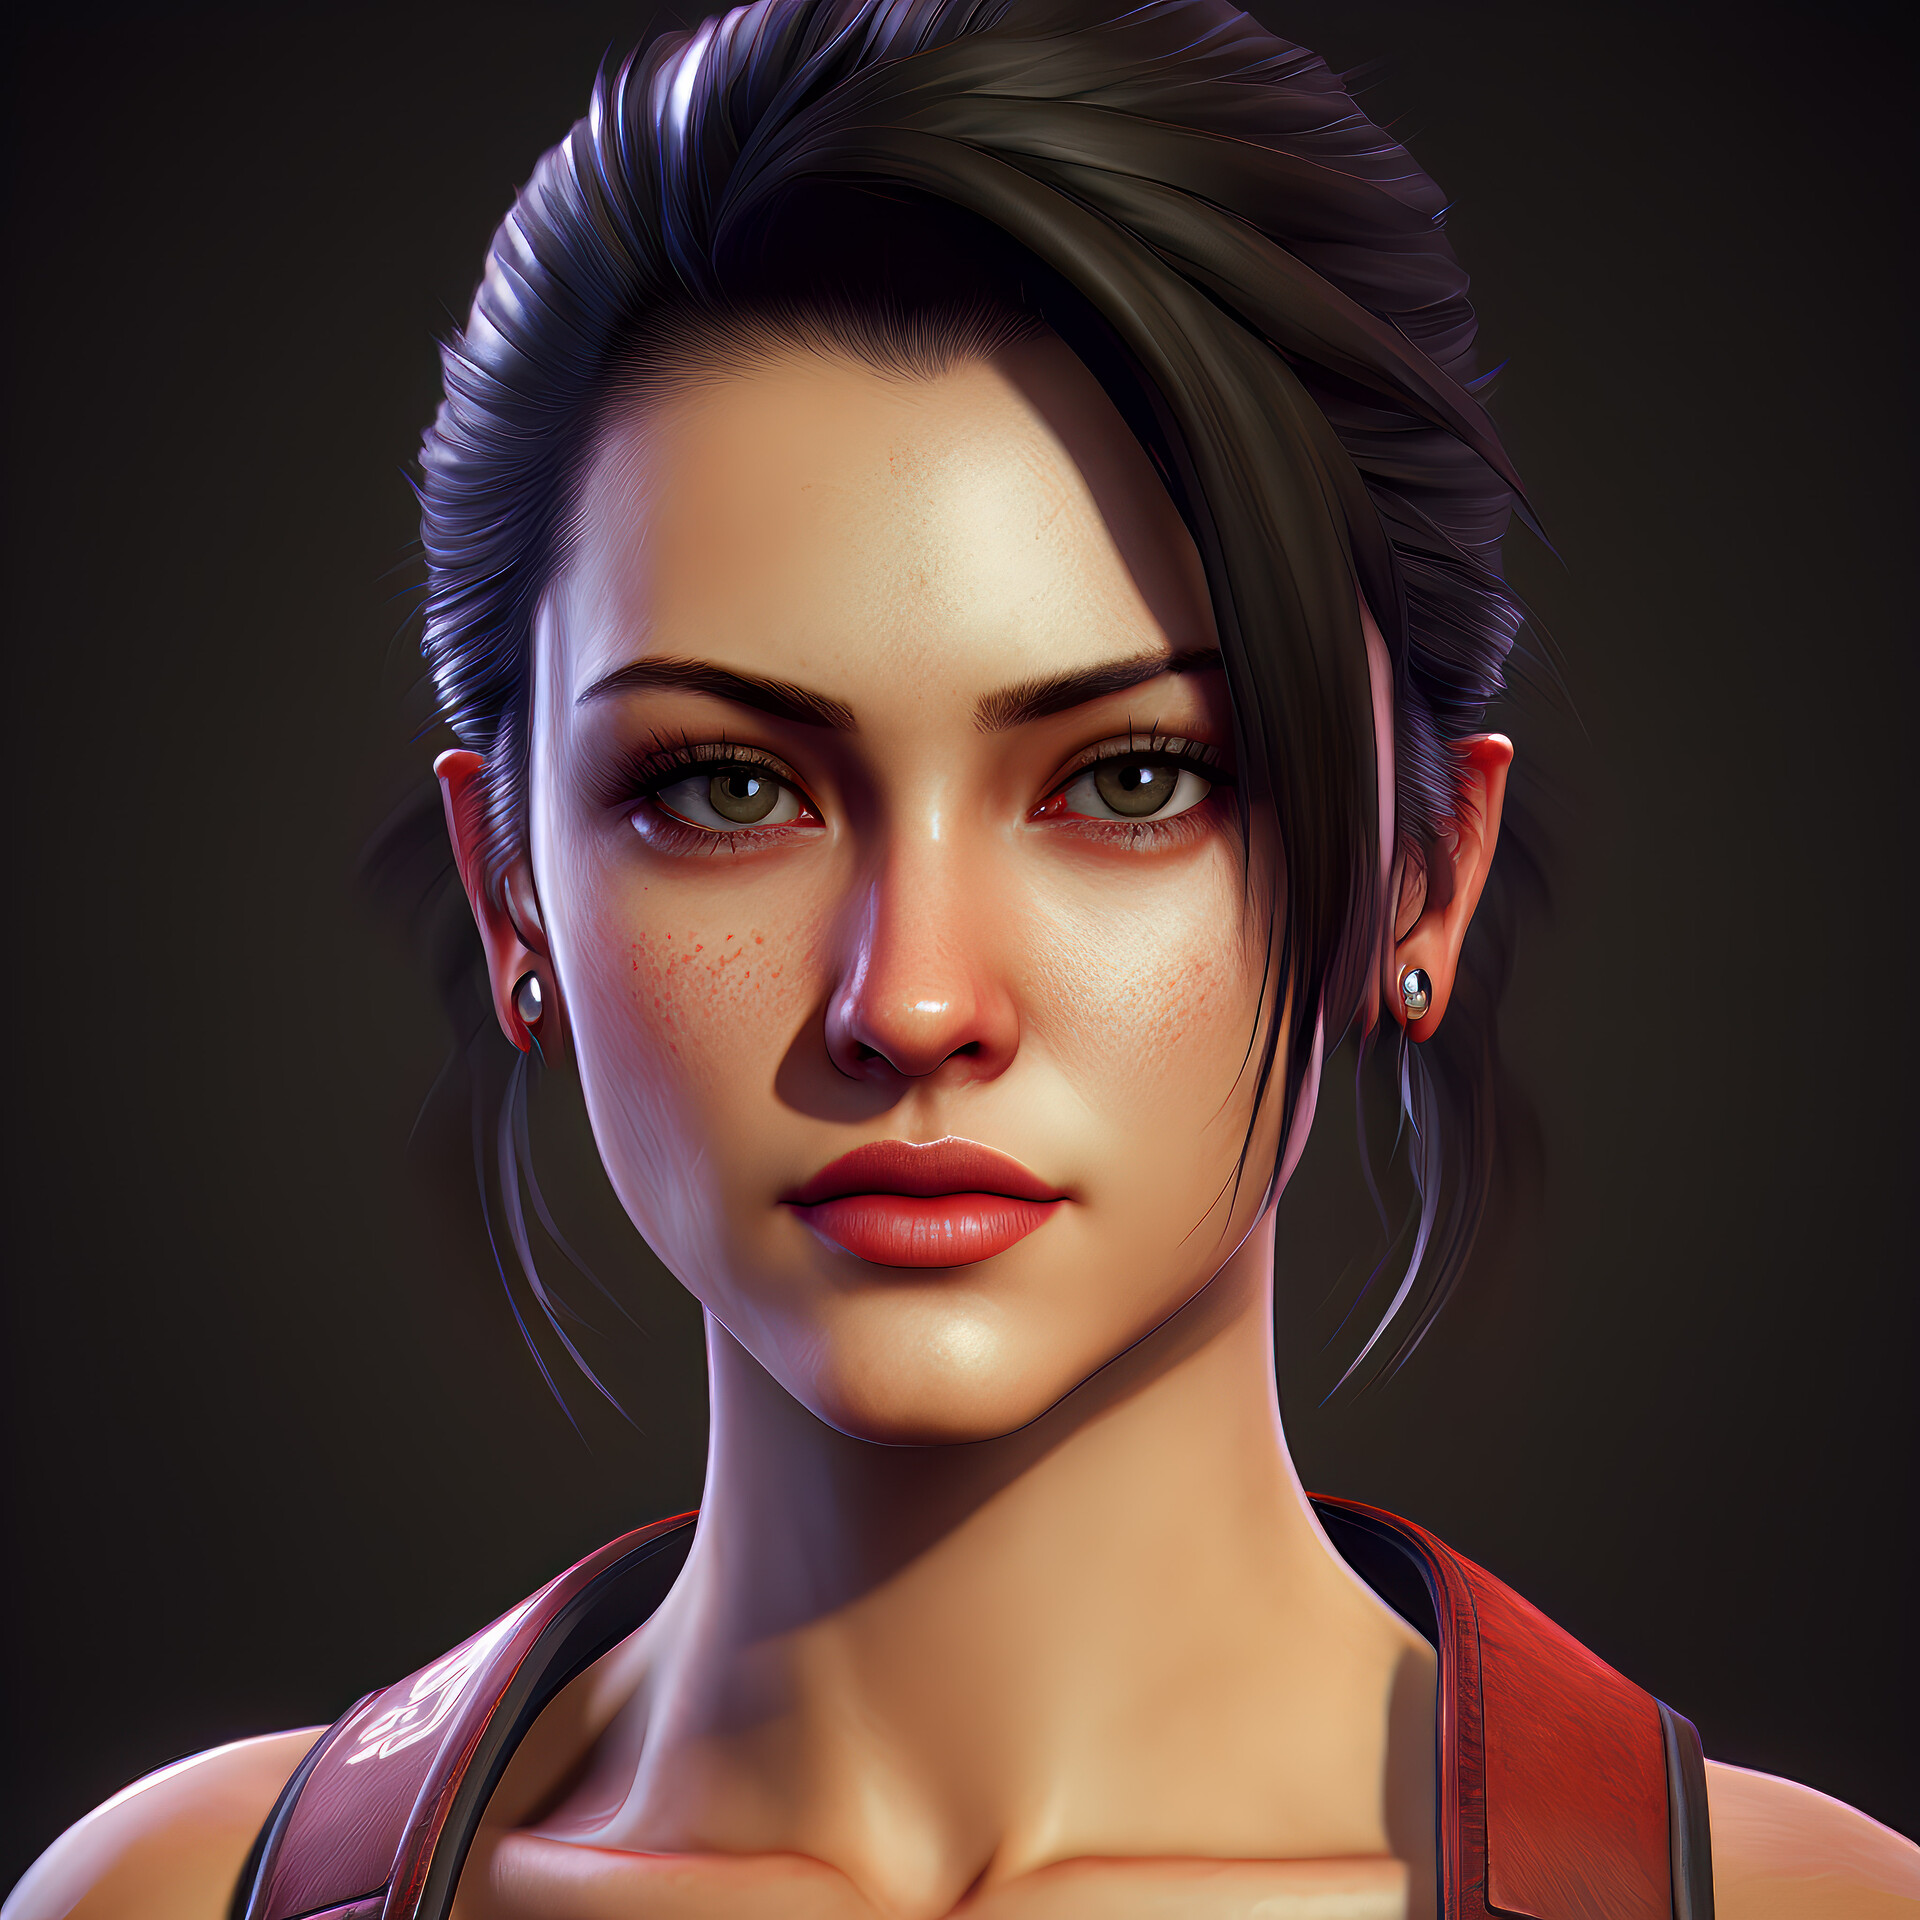 Here's Claire Redfield's face model